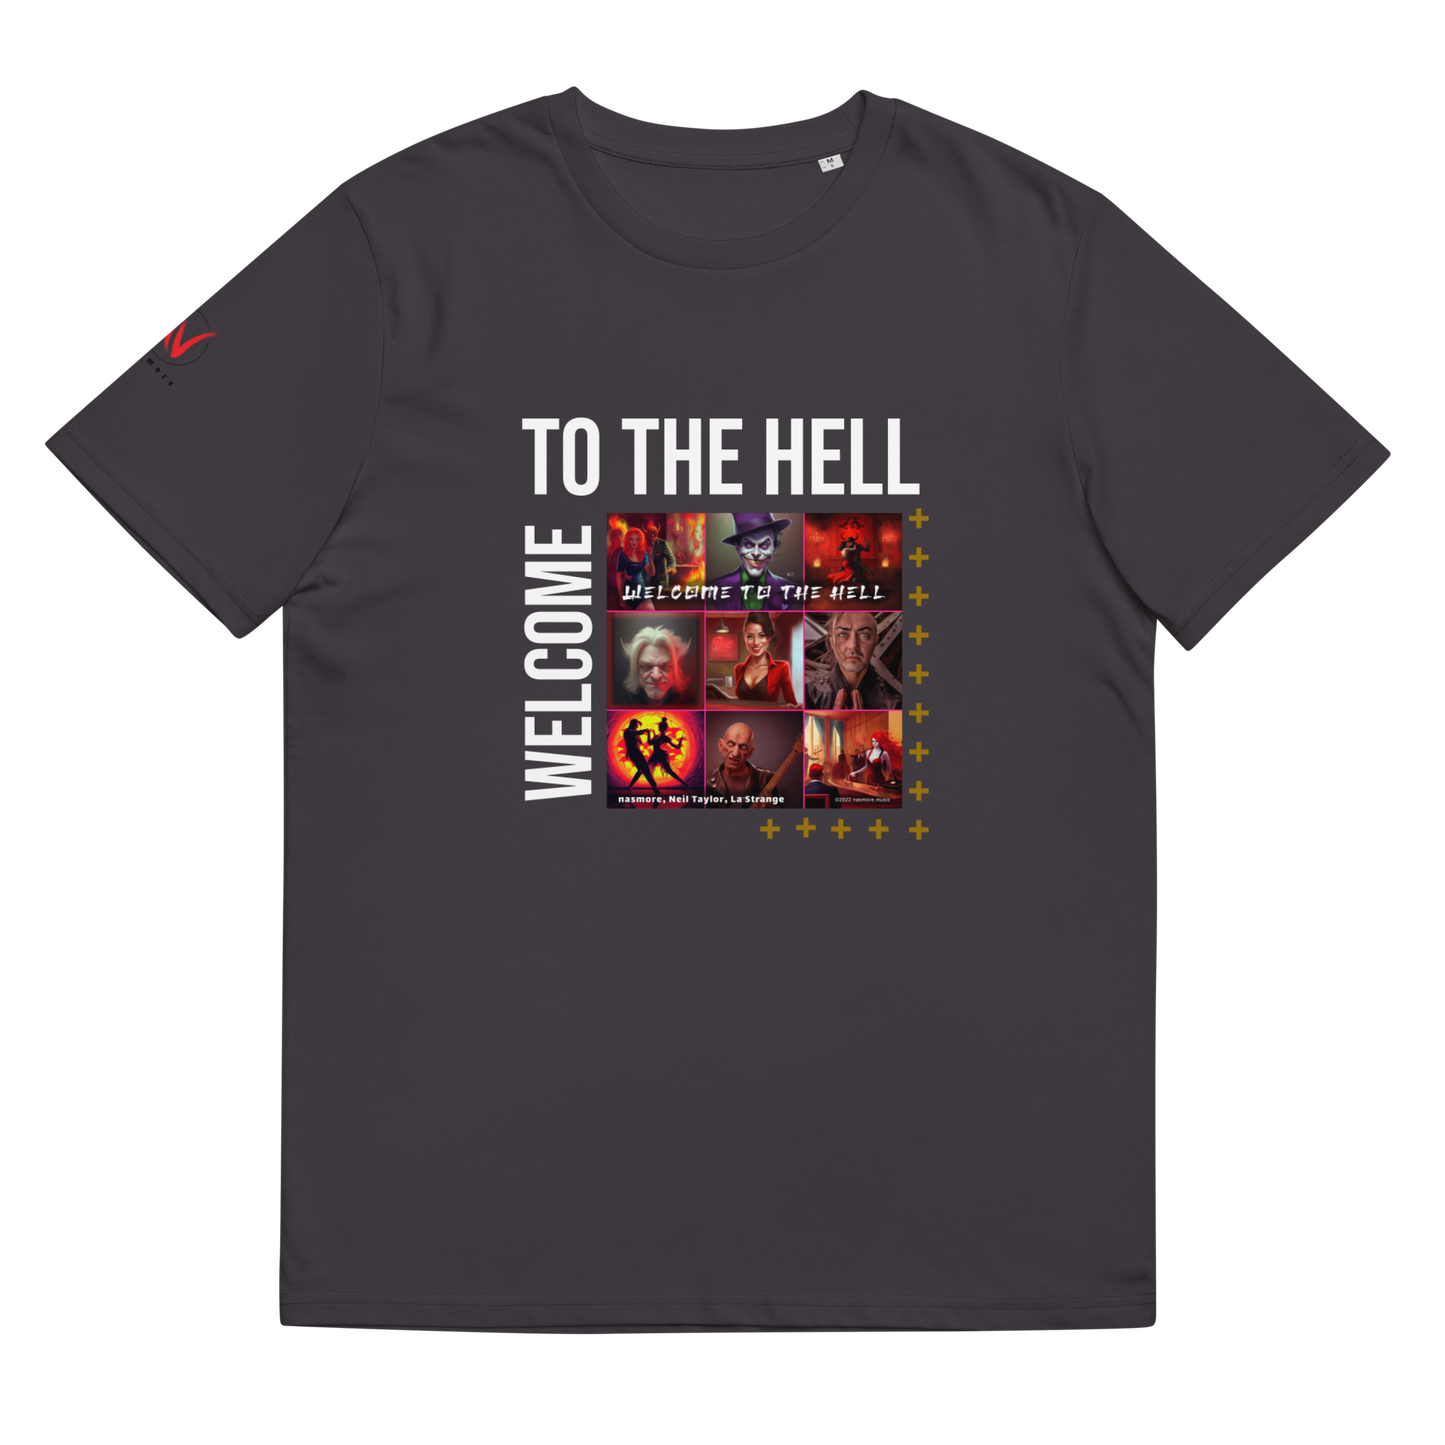 "Welcome to the Hell (Official)" - Unisex organic cotton t-shirt